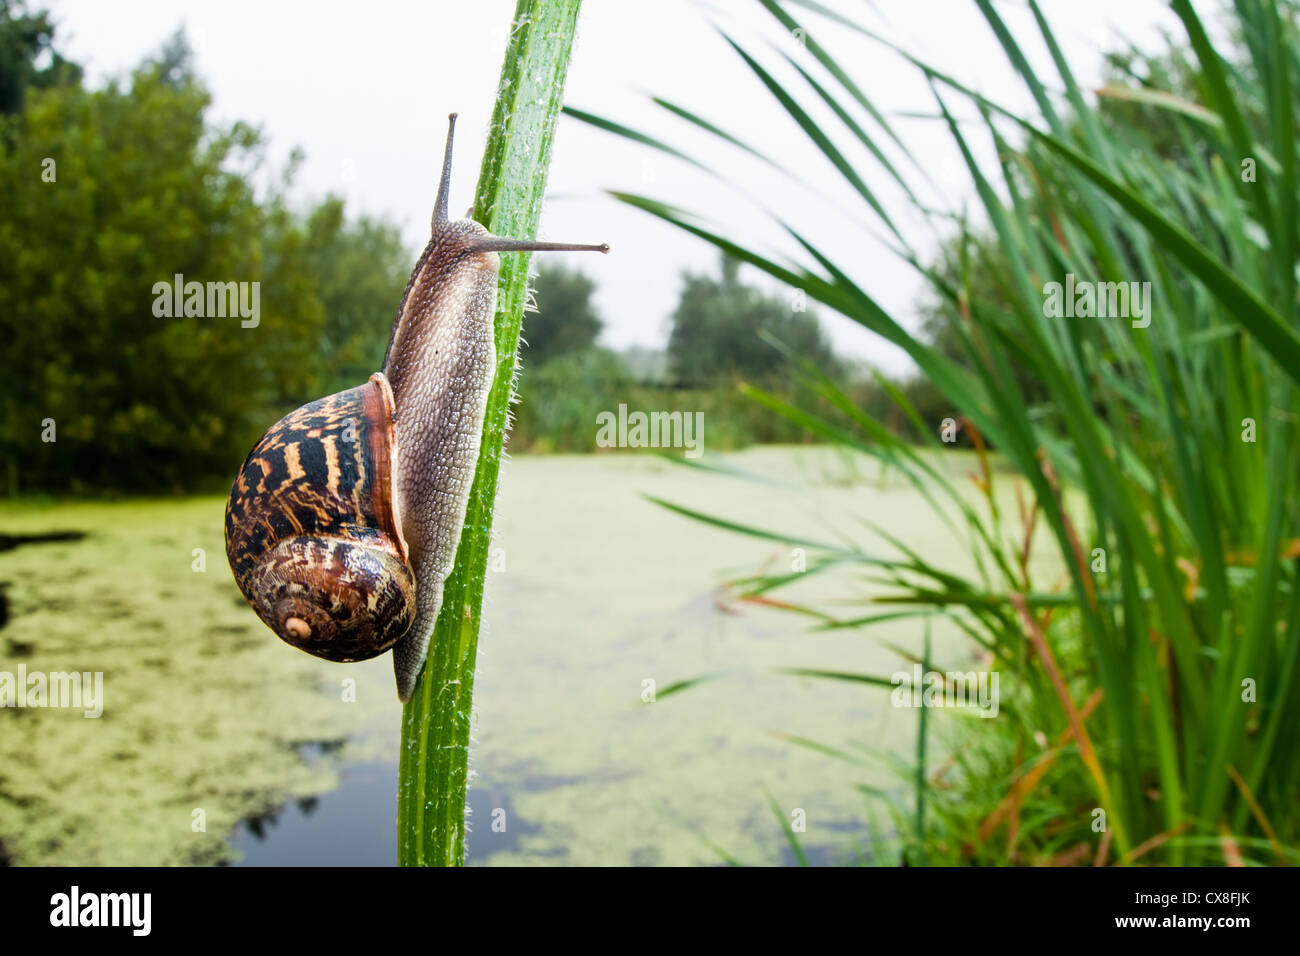 A snail working its way up a plant stem, over looking a weed covered pond Stock Photo